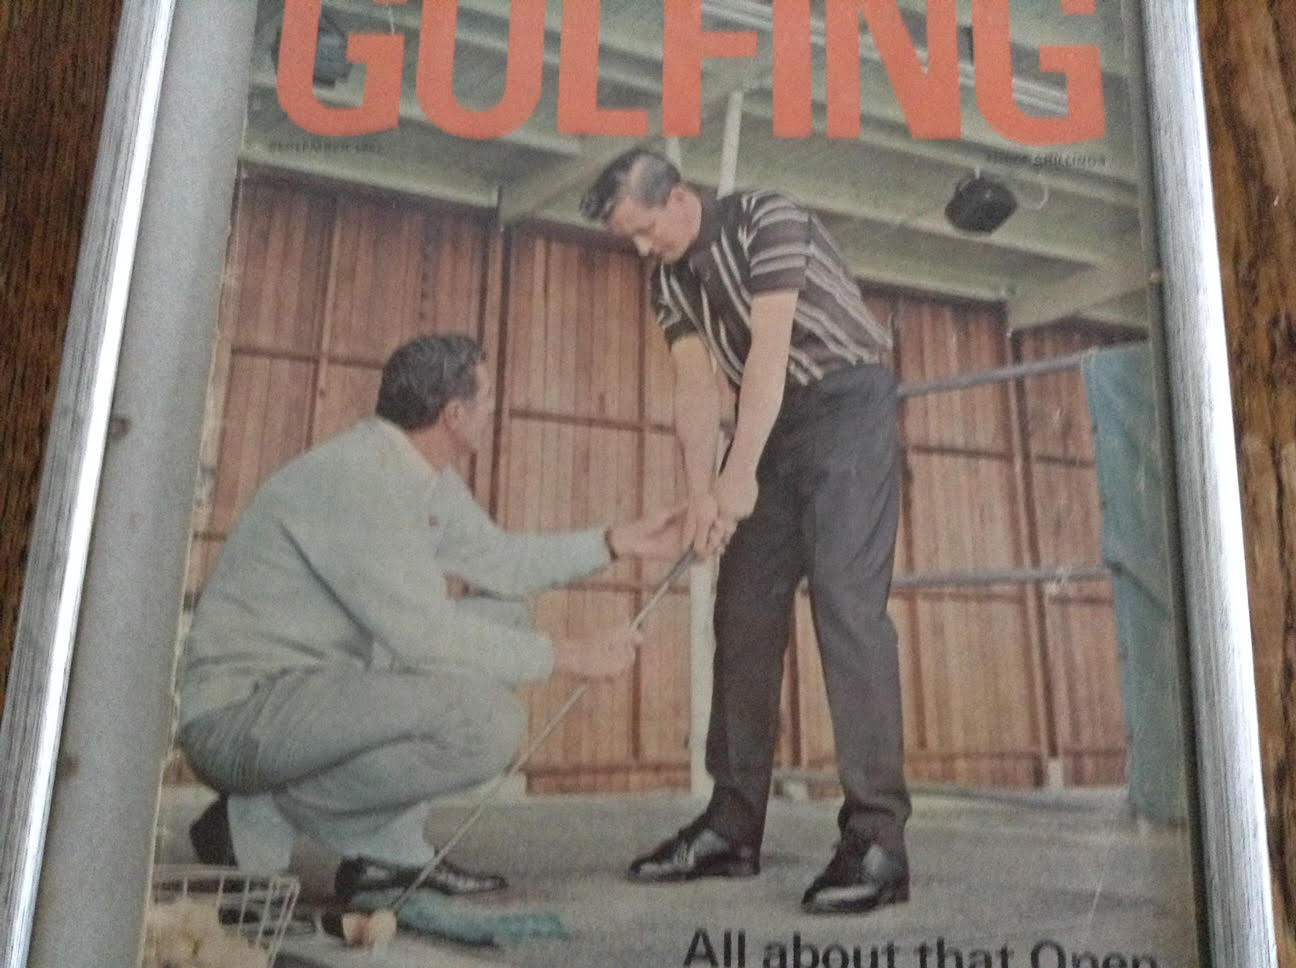 John Ingram appearing on the front cover of Golf Illustrated receiving a lesson from John Jacobs.